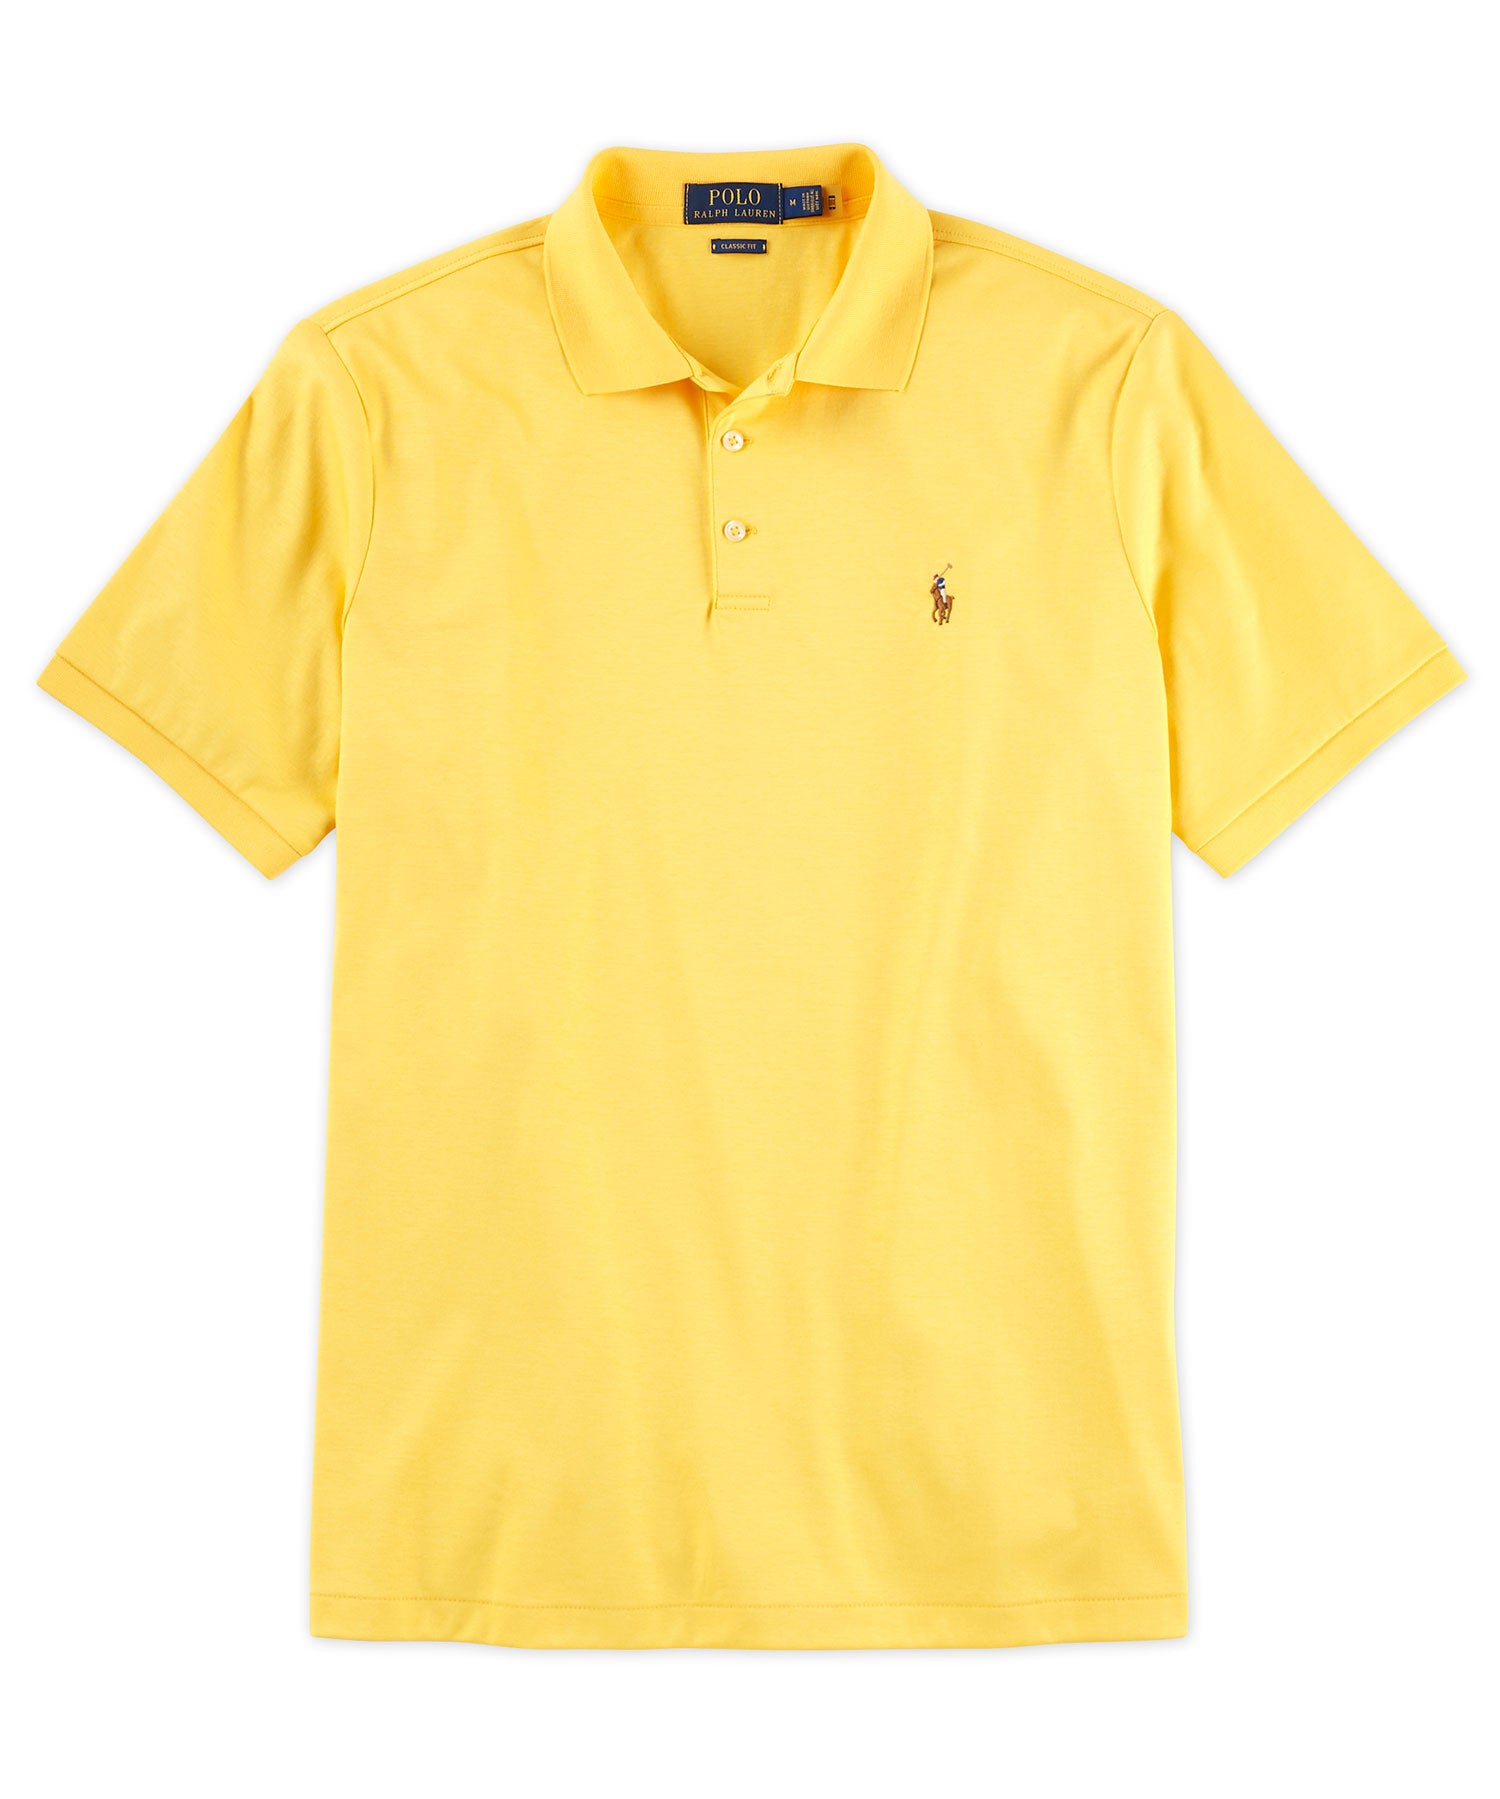 Relaxed Fit Cotton Sleep Short Navy/Polo Yellow S by Polo Ralph Lauren